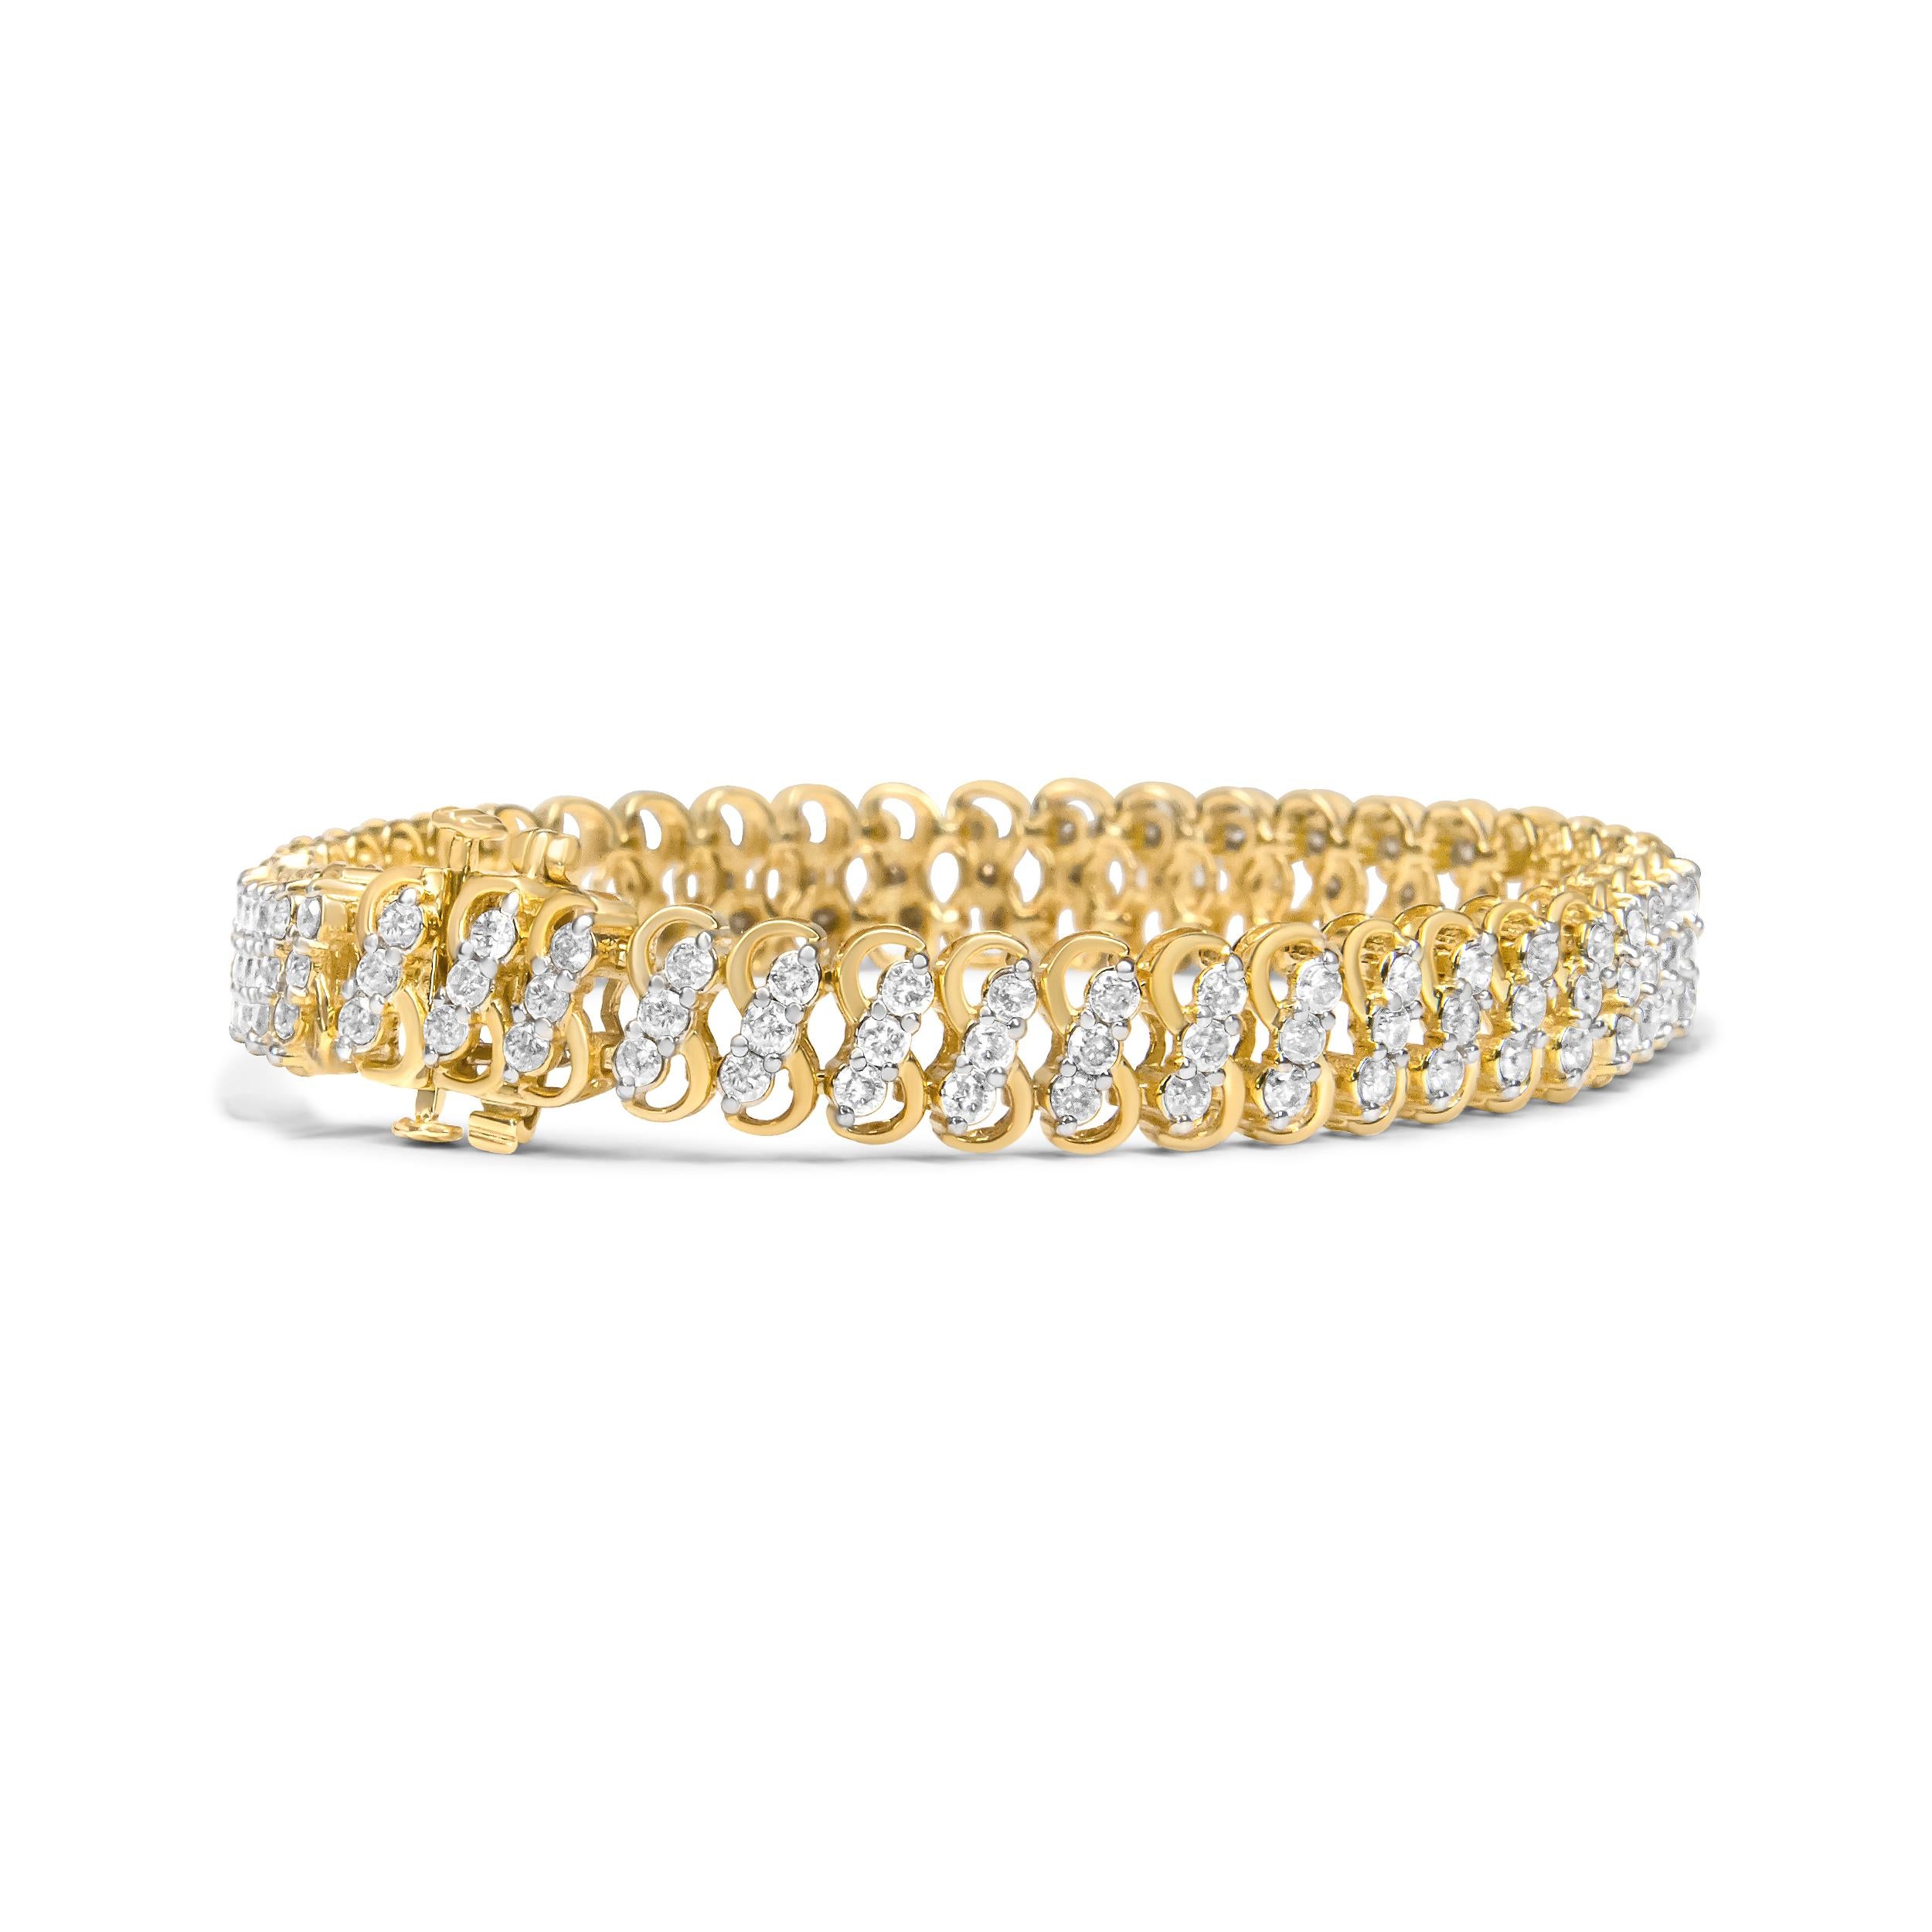 Take your love for tennis bracelets to new heights with this stunning piece that features three rows of natural, brilliant diamonds — triple the layers, triple the sparkle. Totaling up to 4 cttw, the 138 natural diamonds encased in the shared prong